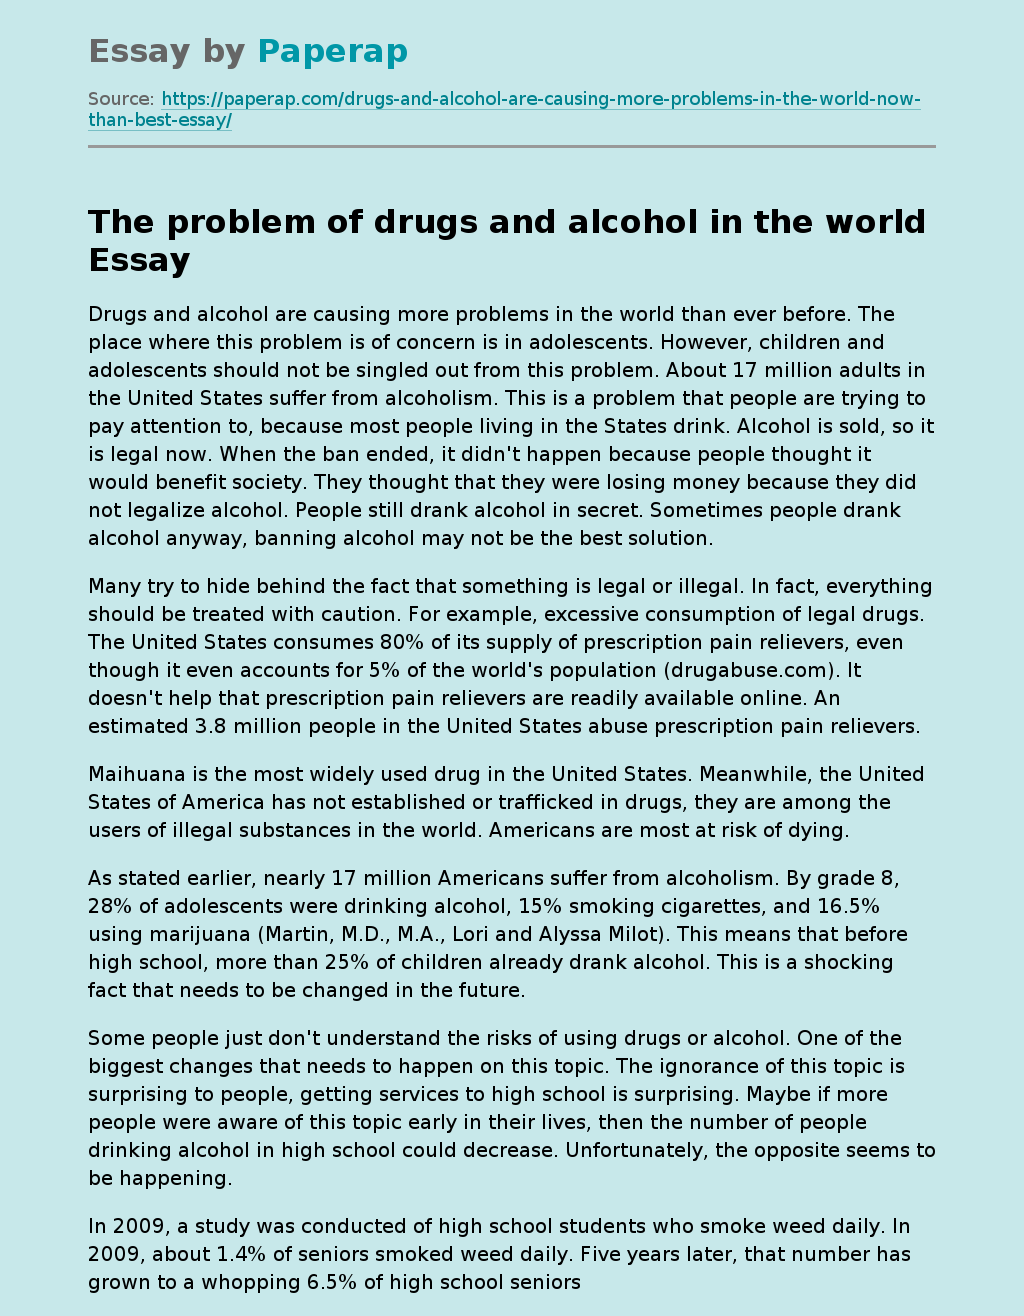 The problem of drugs and alcohol in the world